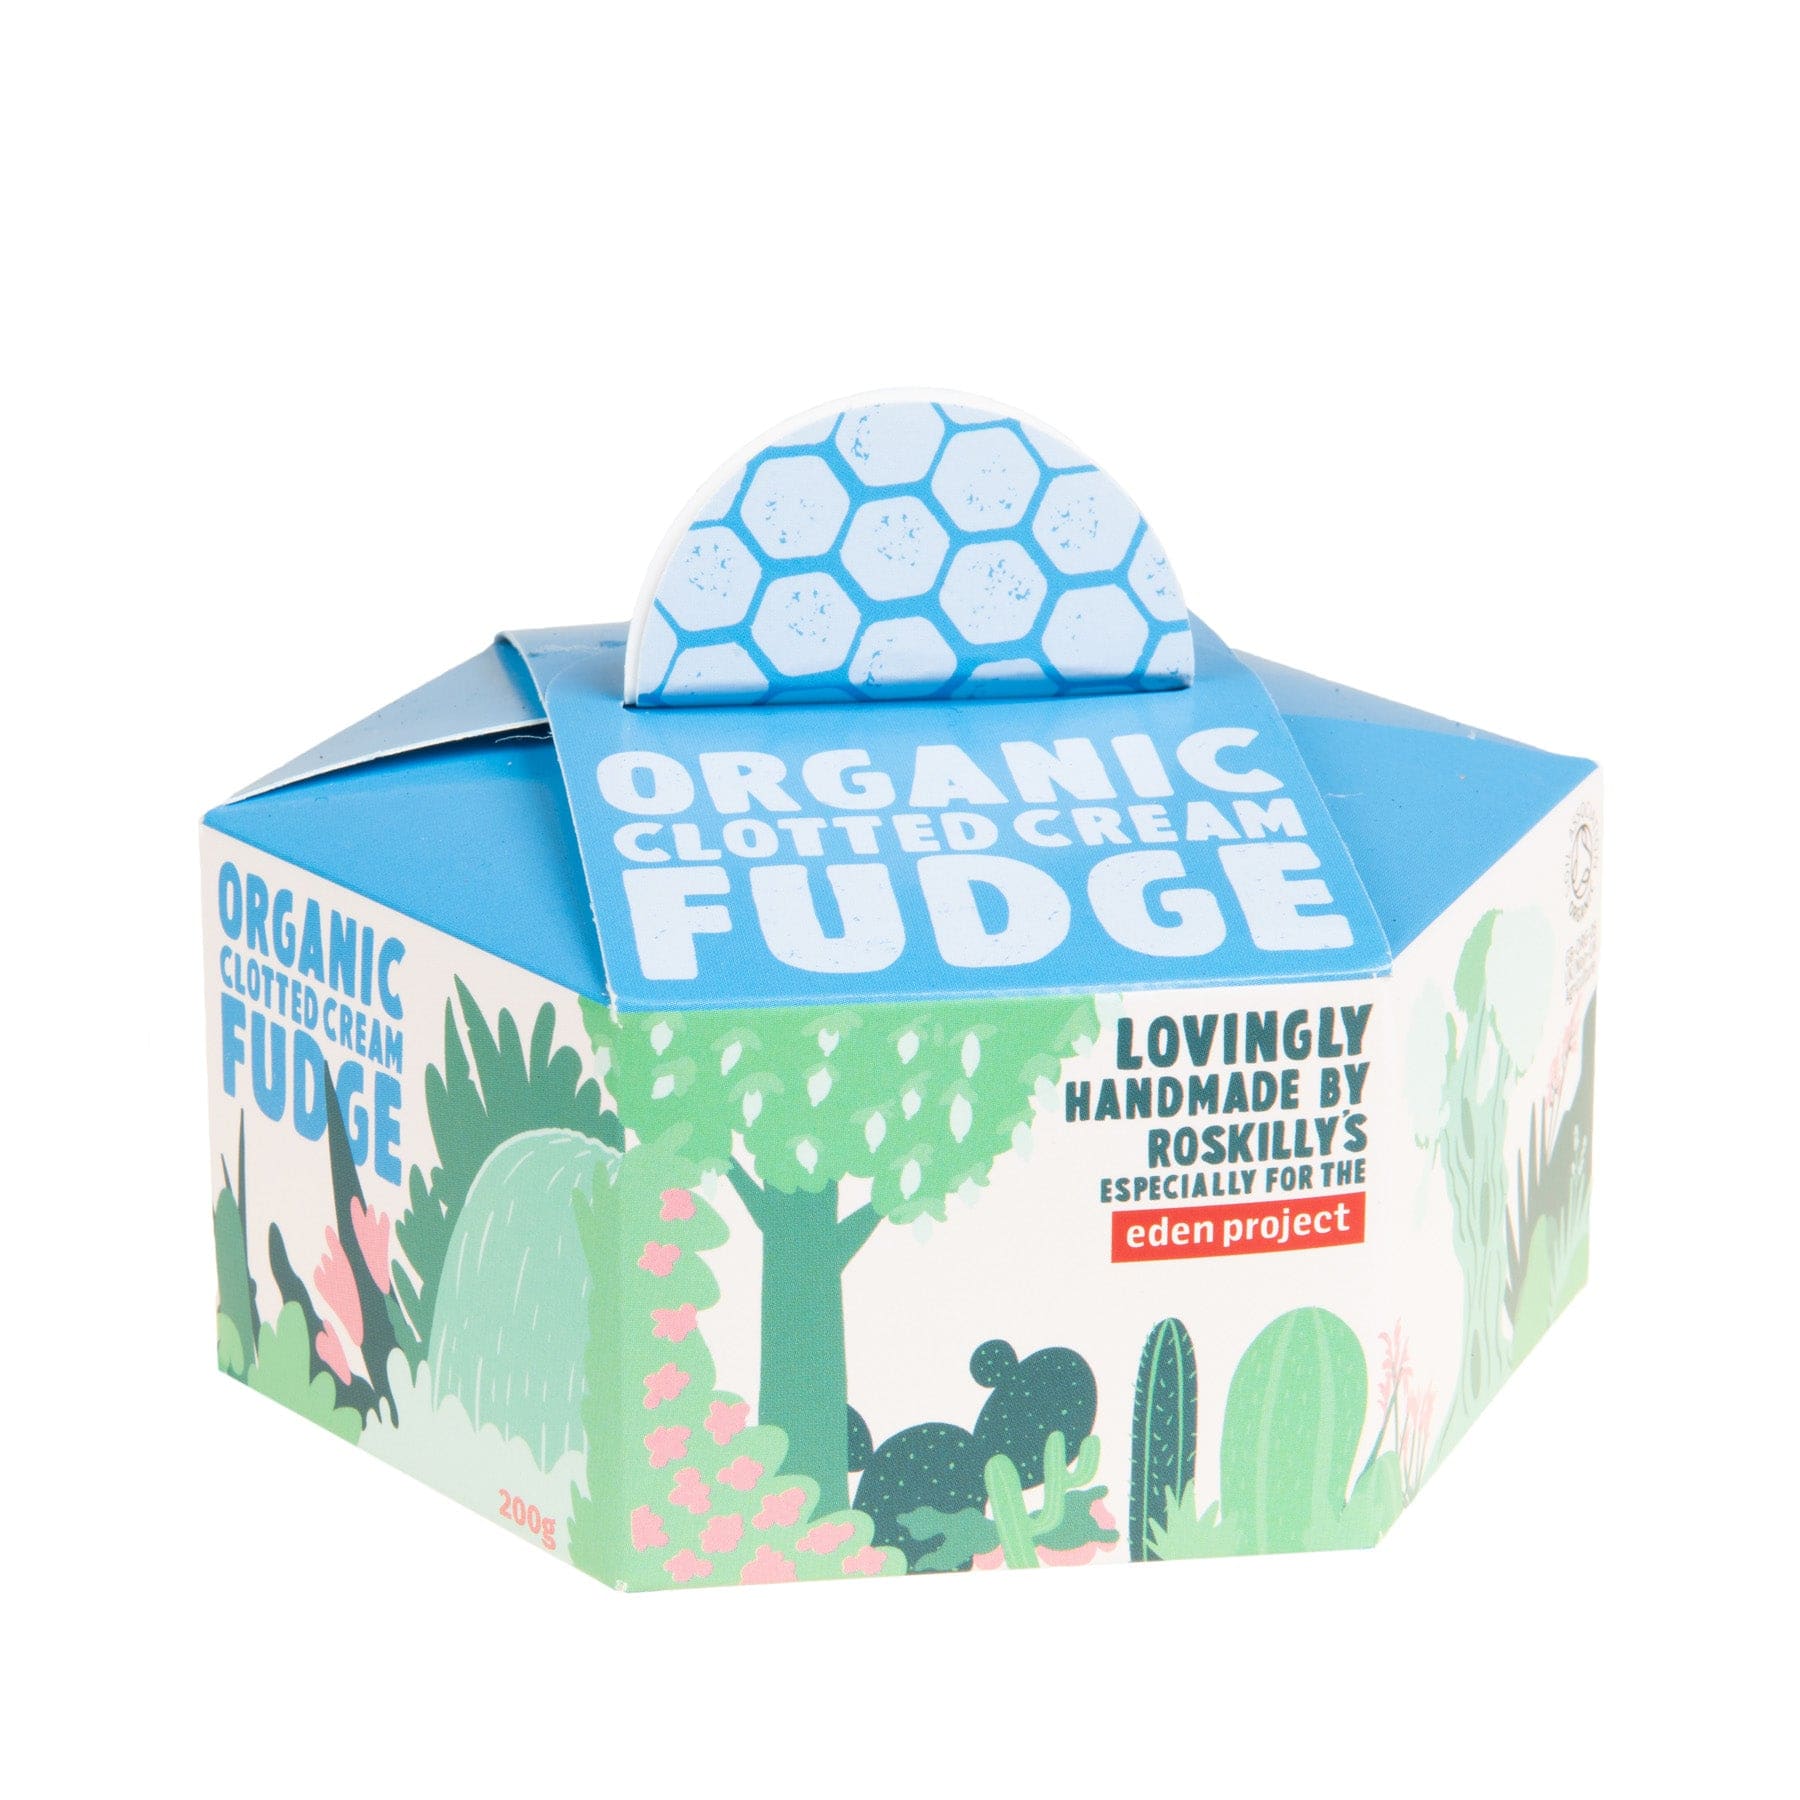 Organic Clotted Cream Fudge packaging, blue and green box with floral and cactus design, handmade by Roskilly's for the Eden Project, white background